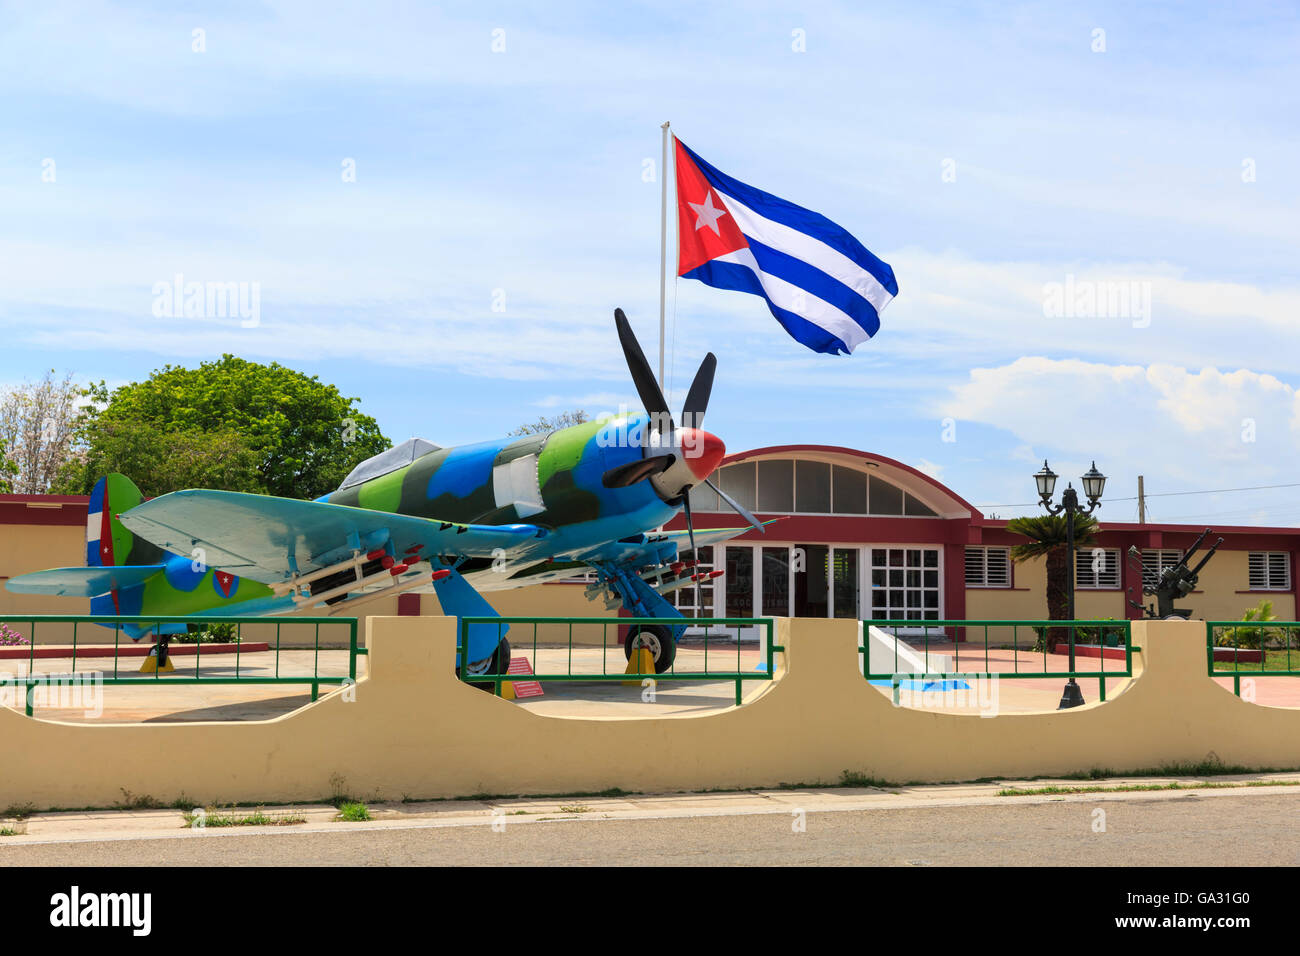 Museo Playa Girón, Bay of Pigs Museum dedicated to the invasion and battle, with Hawker Fury fighter plane, Cuba Stock Photo